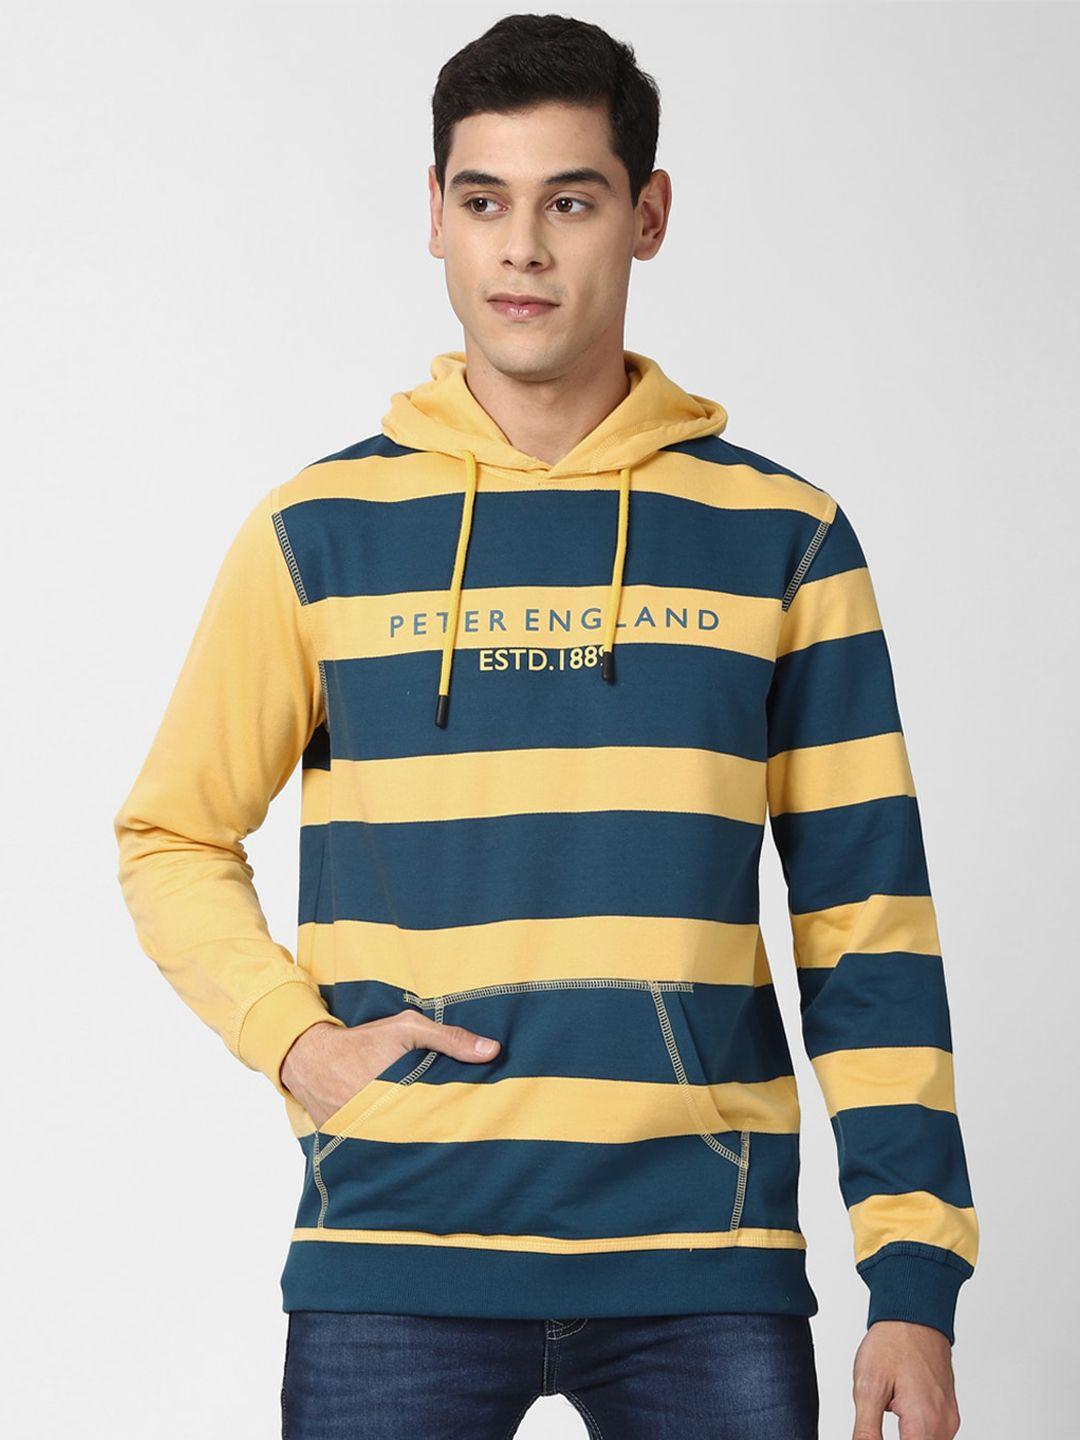 peter england casuals men yellow & teal blue striped hooded sweatshirt